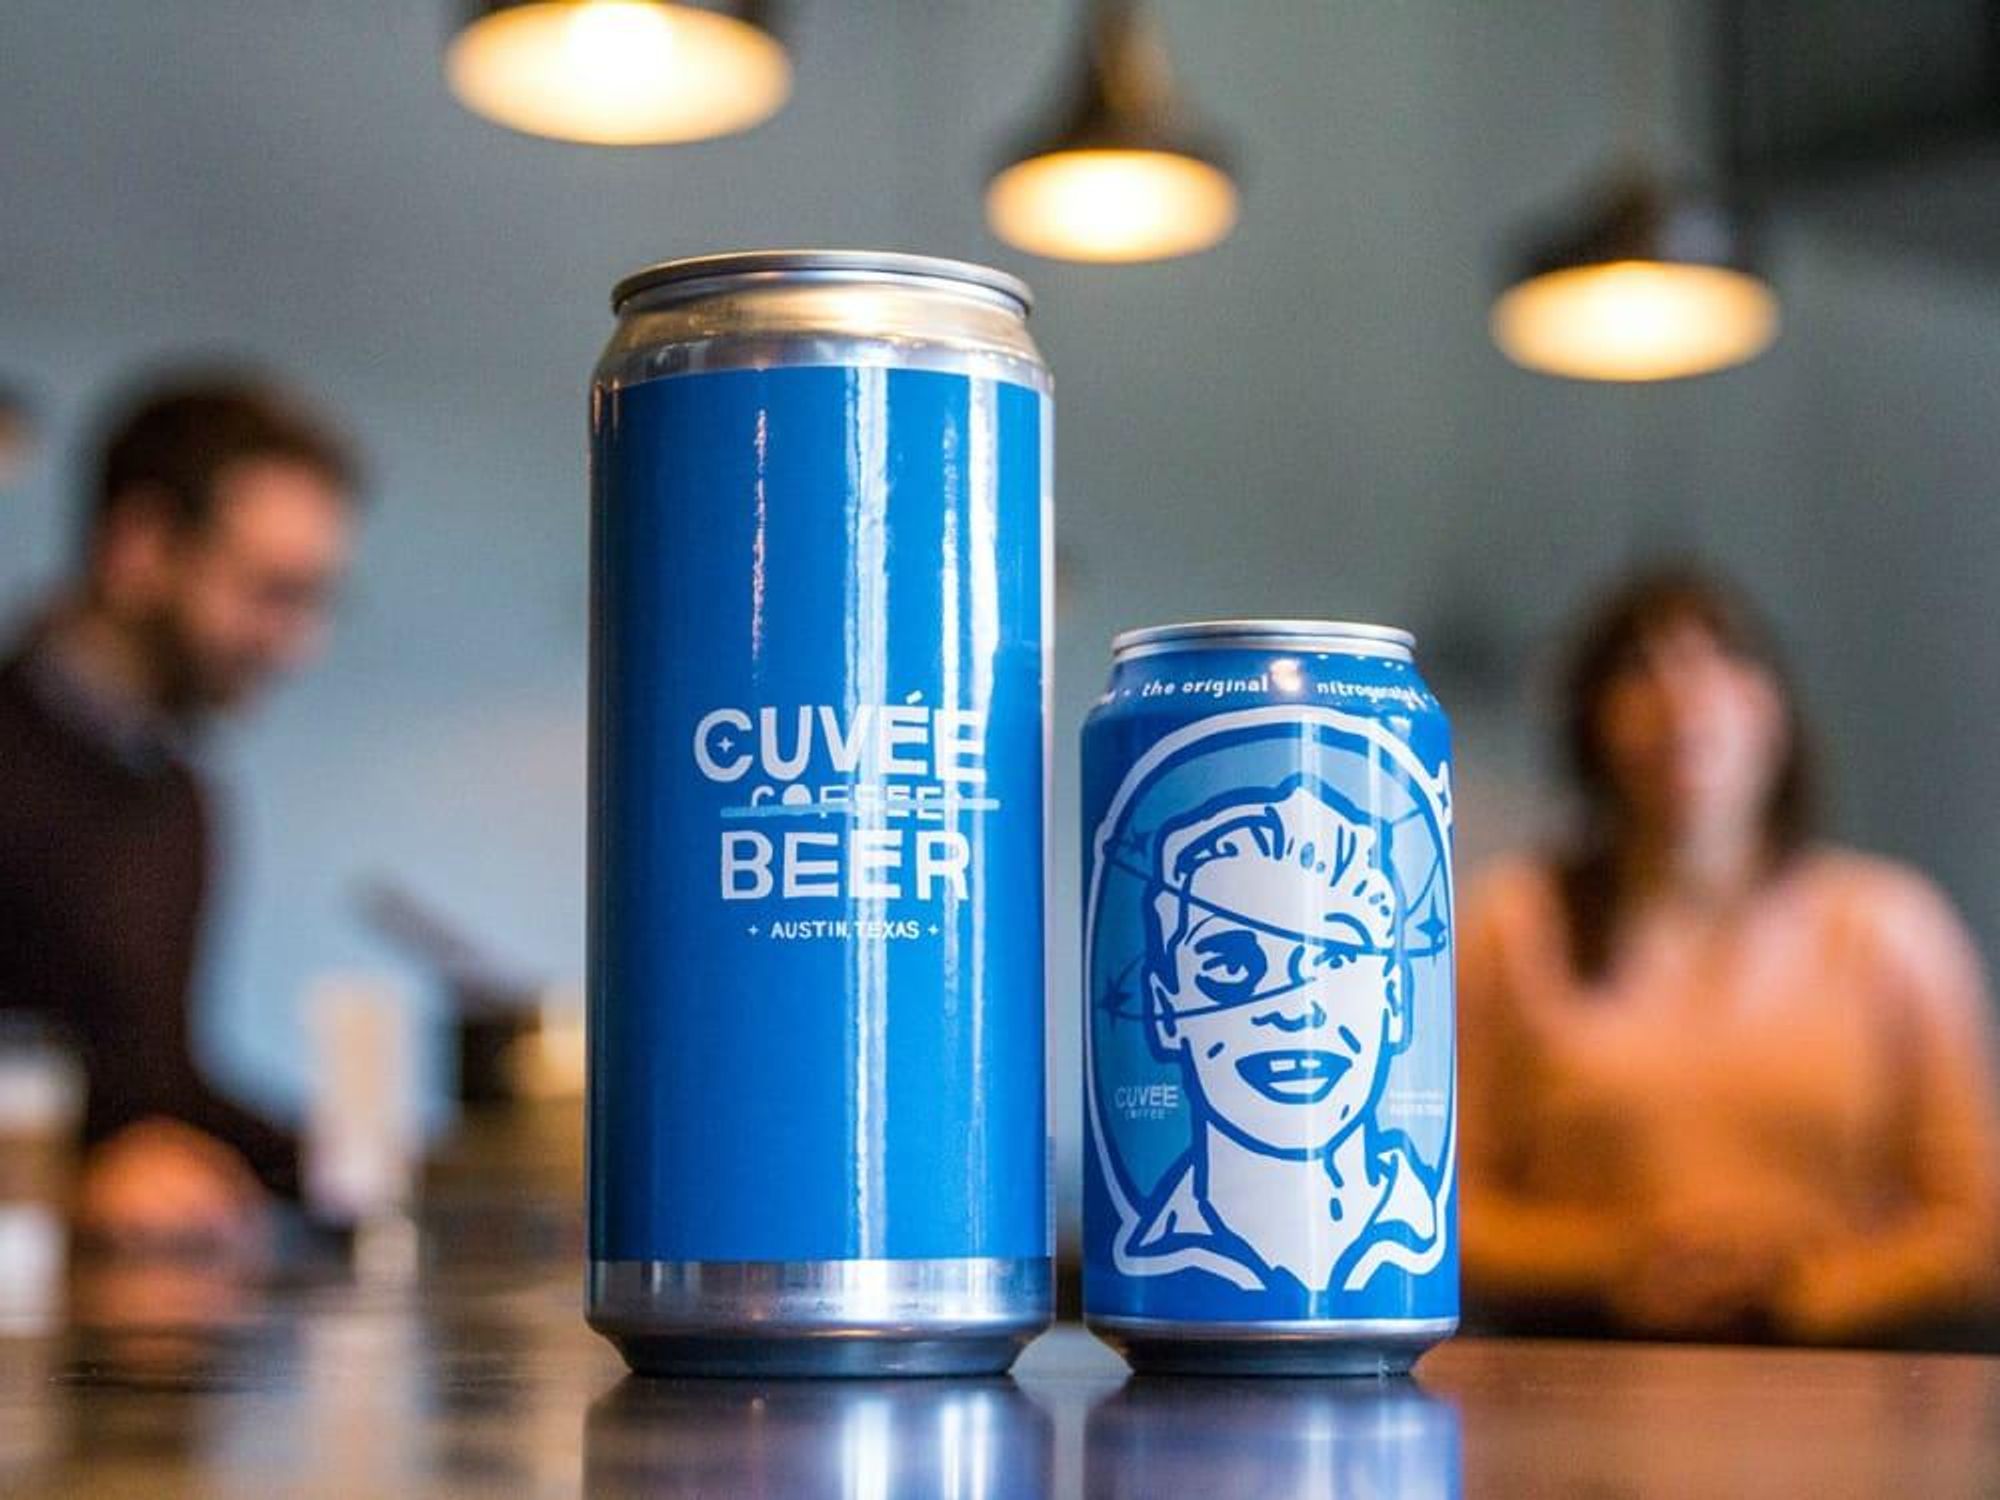 Cuffee Coffee Black and Blue nitro beer can 2015